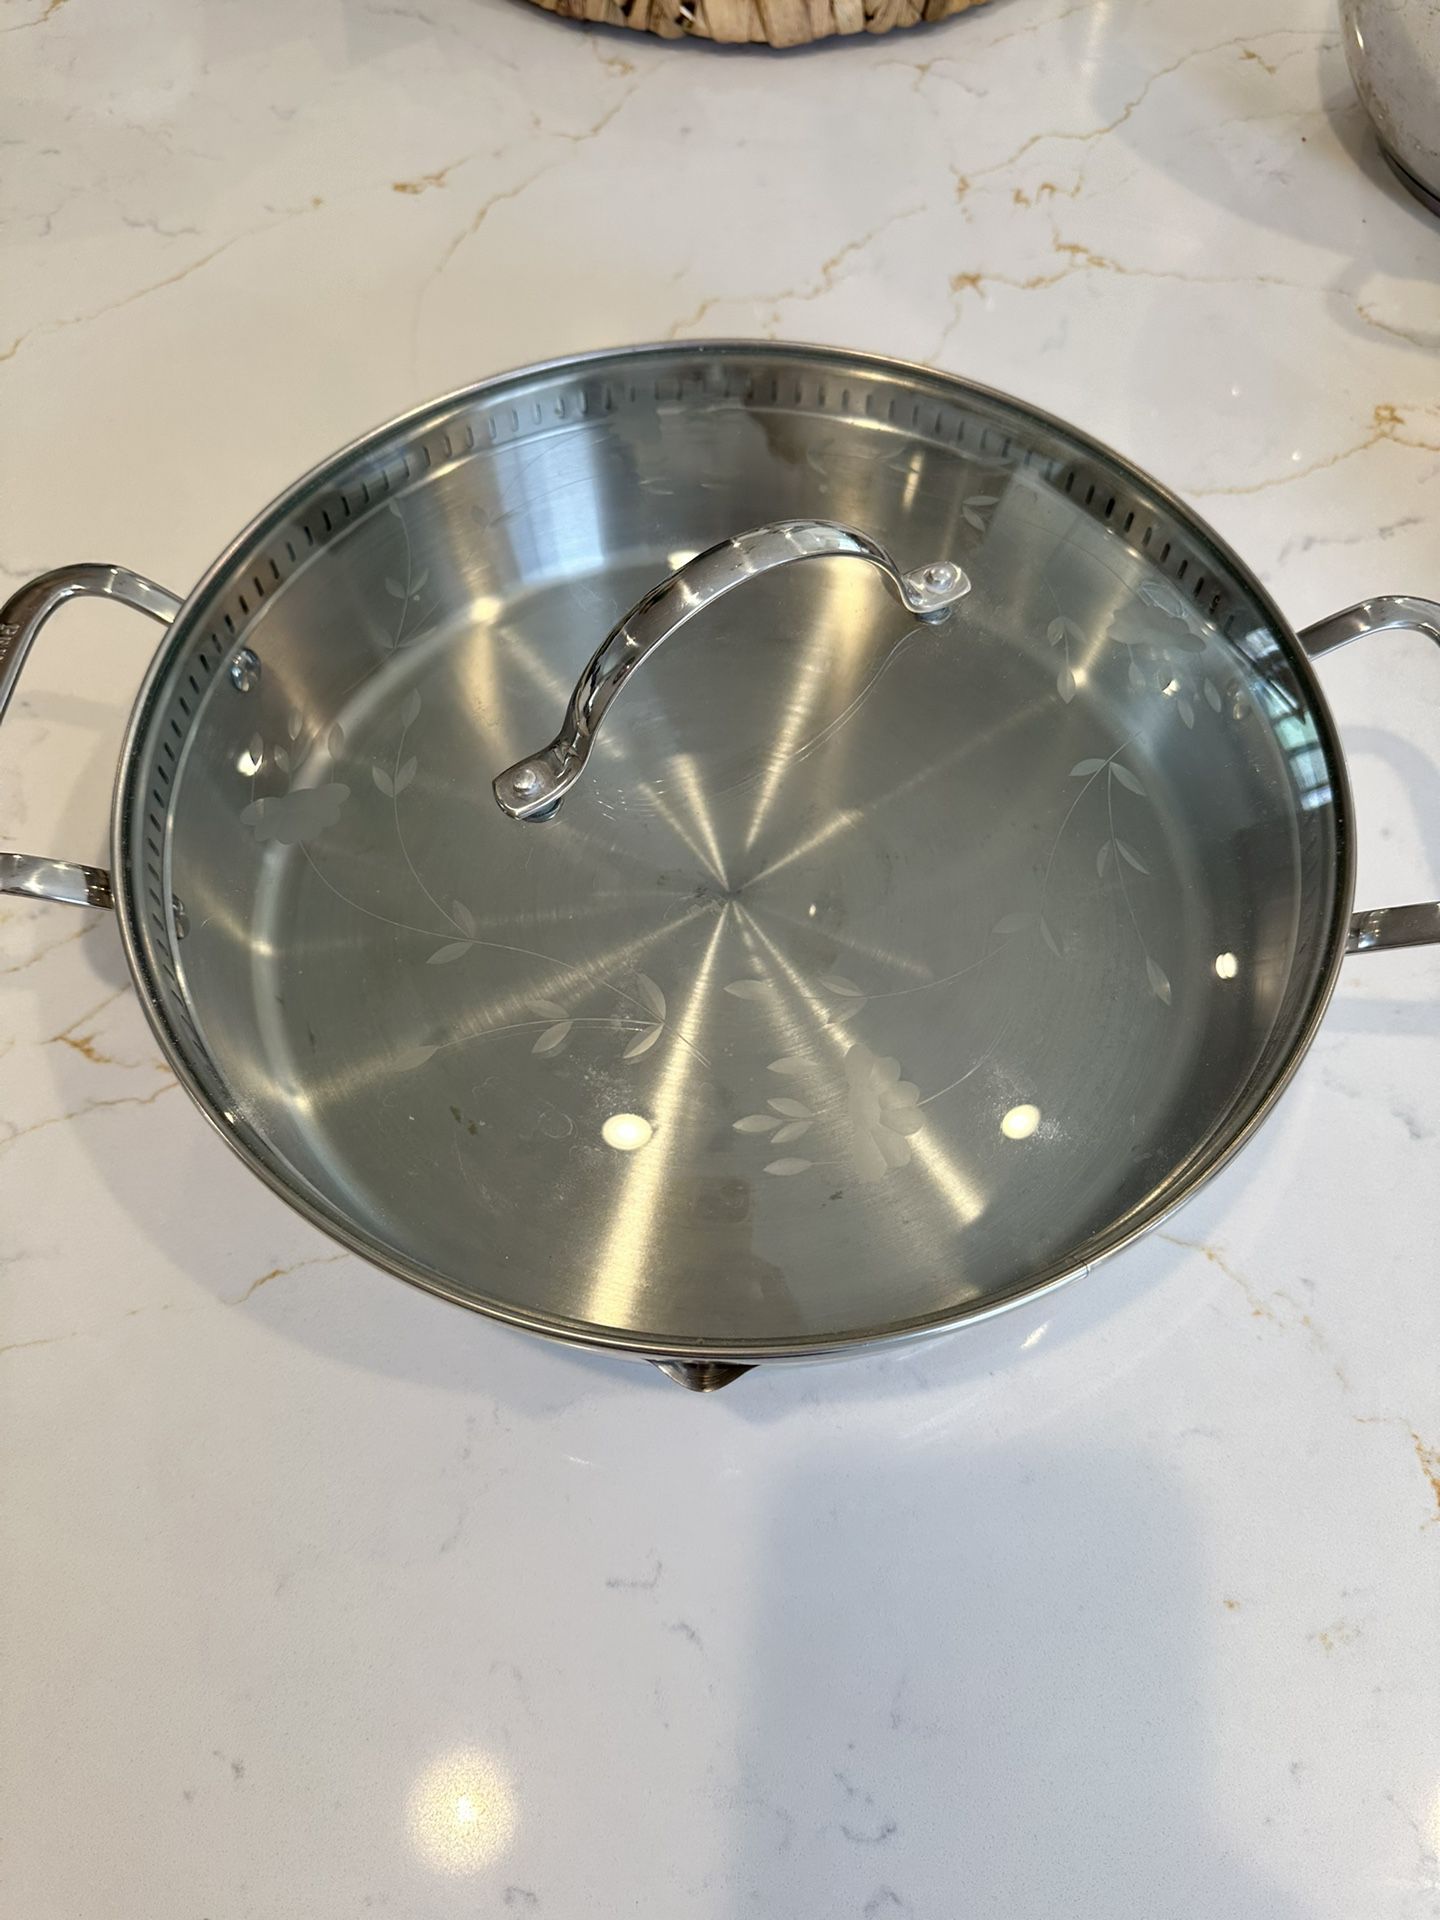 New Princess House 12” Pan for Sale in Whittier, CA - OfferUp